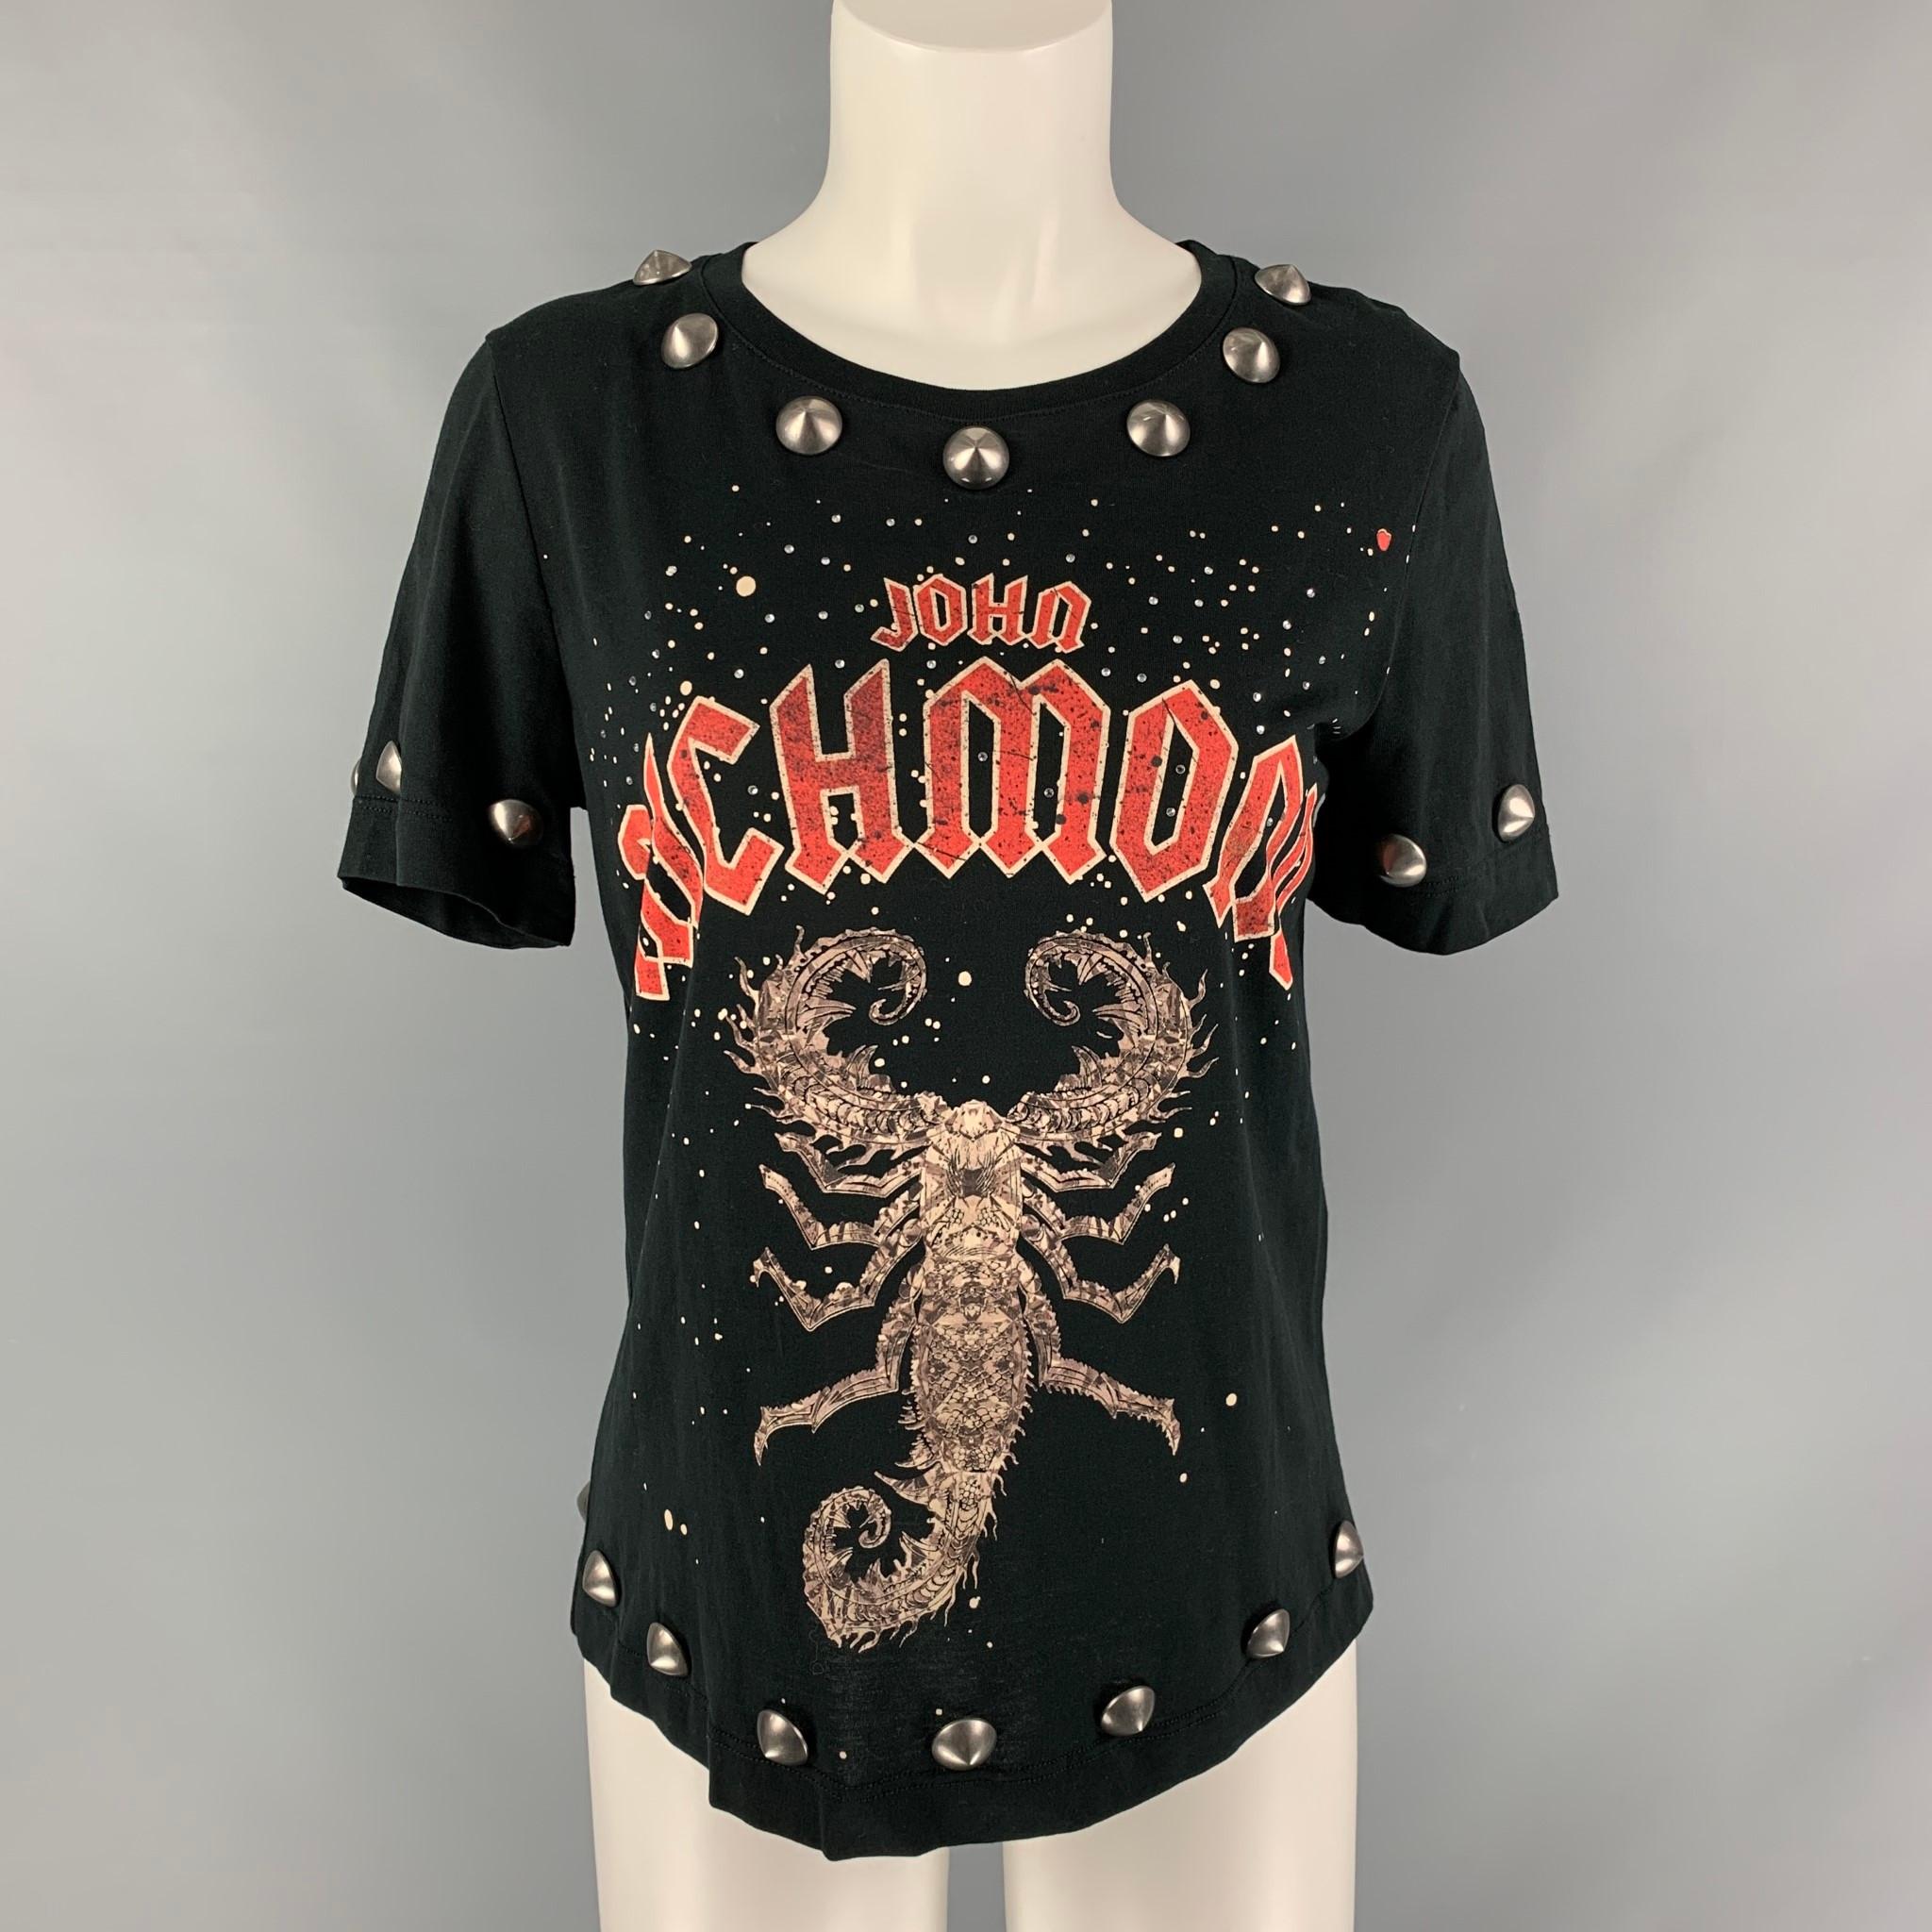 JOHN RICHMOND T-shirt comes in a black cotton jersey featuring a crew neck, graphic print at center front and studded details. Made in Italy.

Excellent  Pre-Owned Condition.
Marked: Small

Measurements:

Shoulder: 16 in.
Bust: 40 in.
Sleeve: 8.5